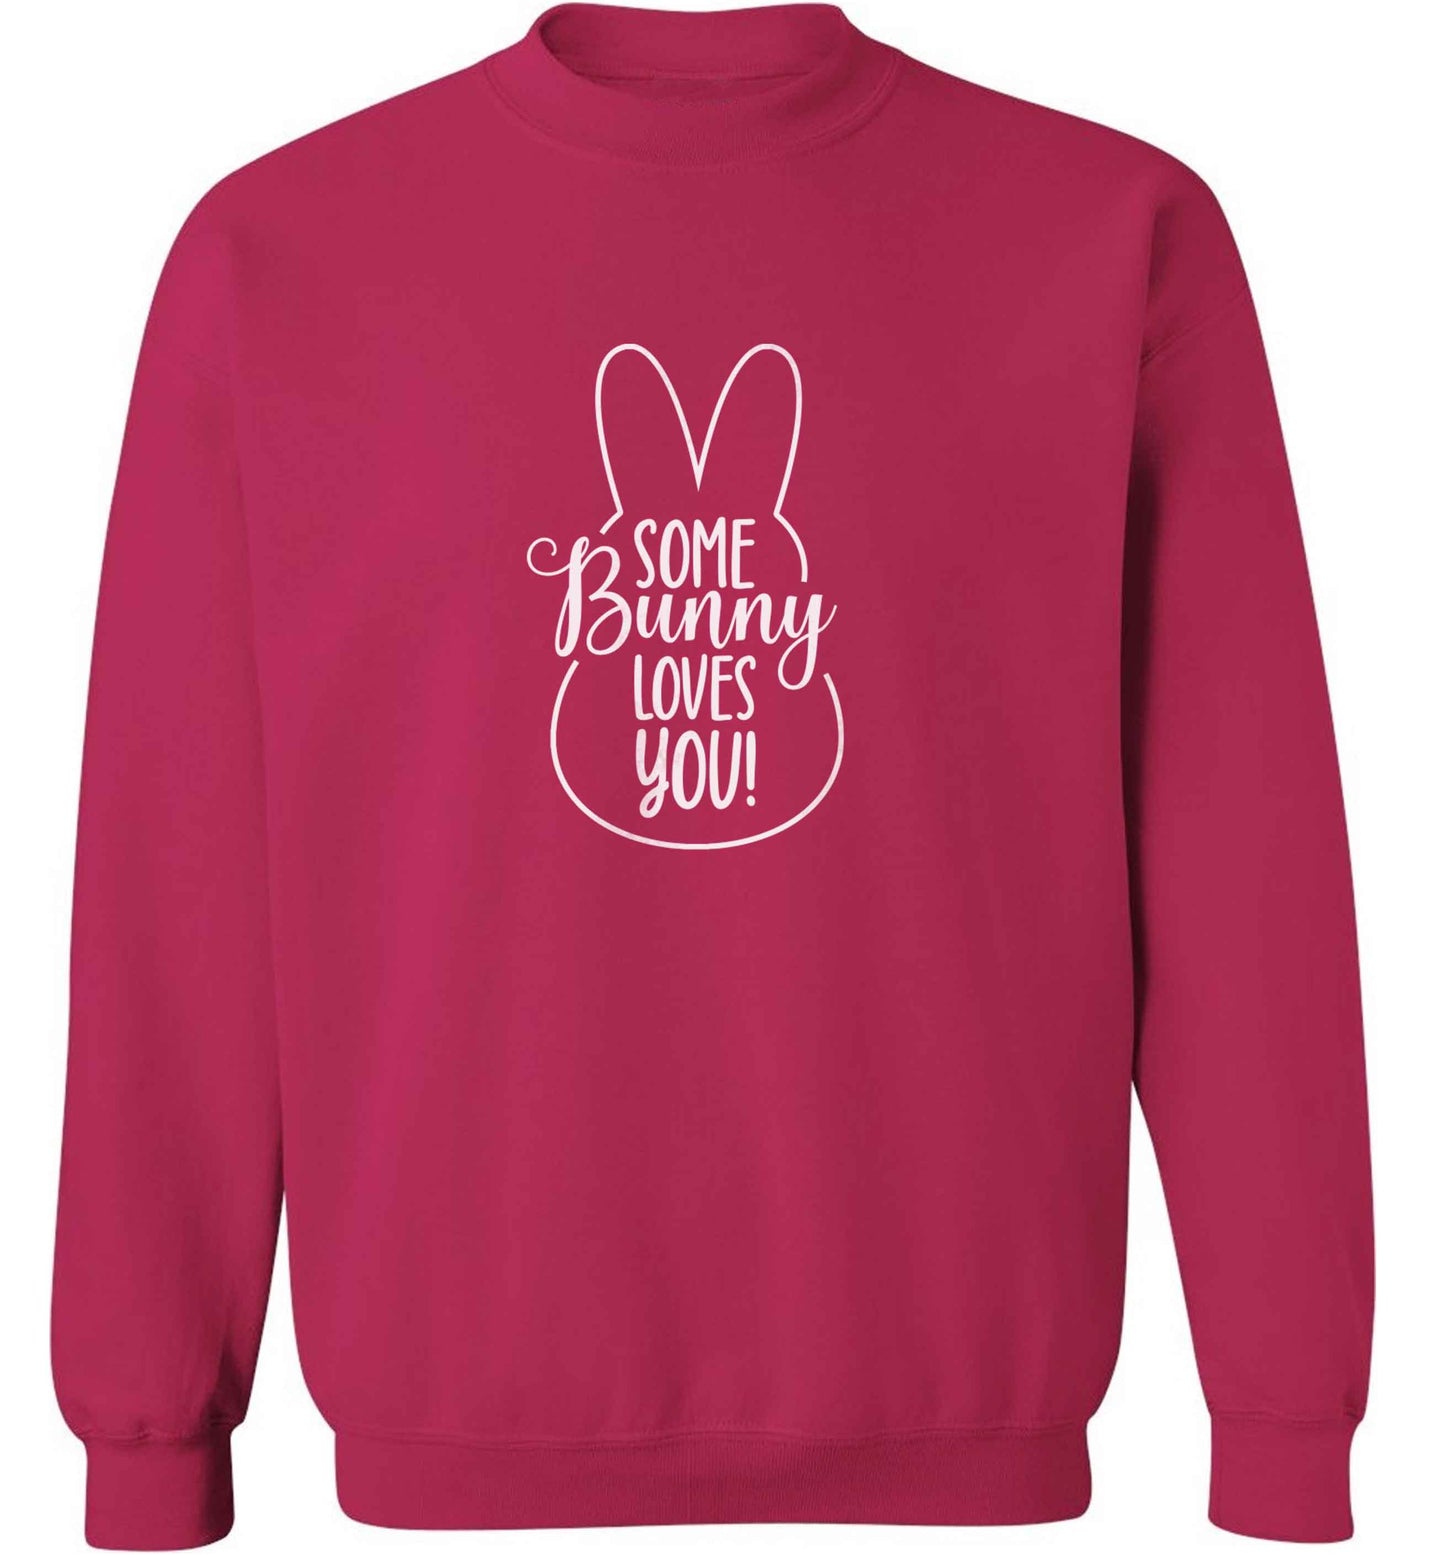 Some bunny loves you adult's unisex pink sweater 2XL